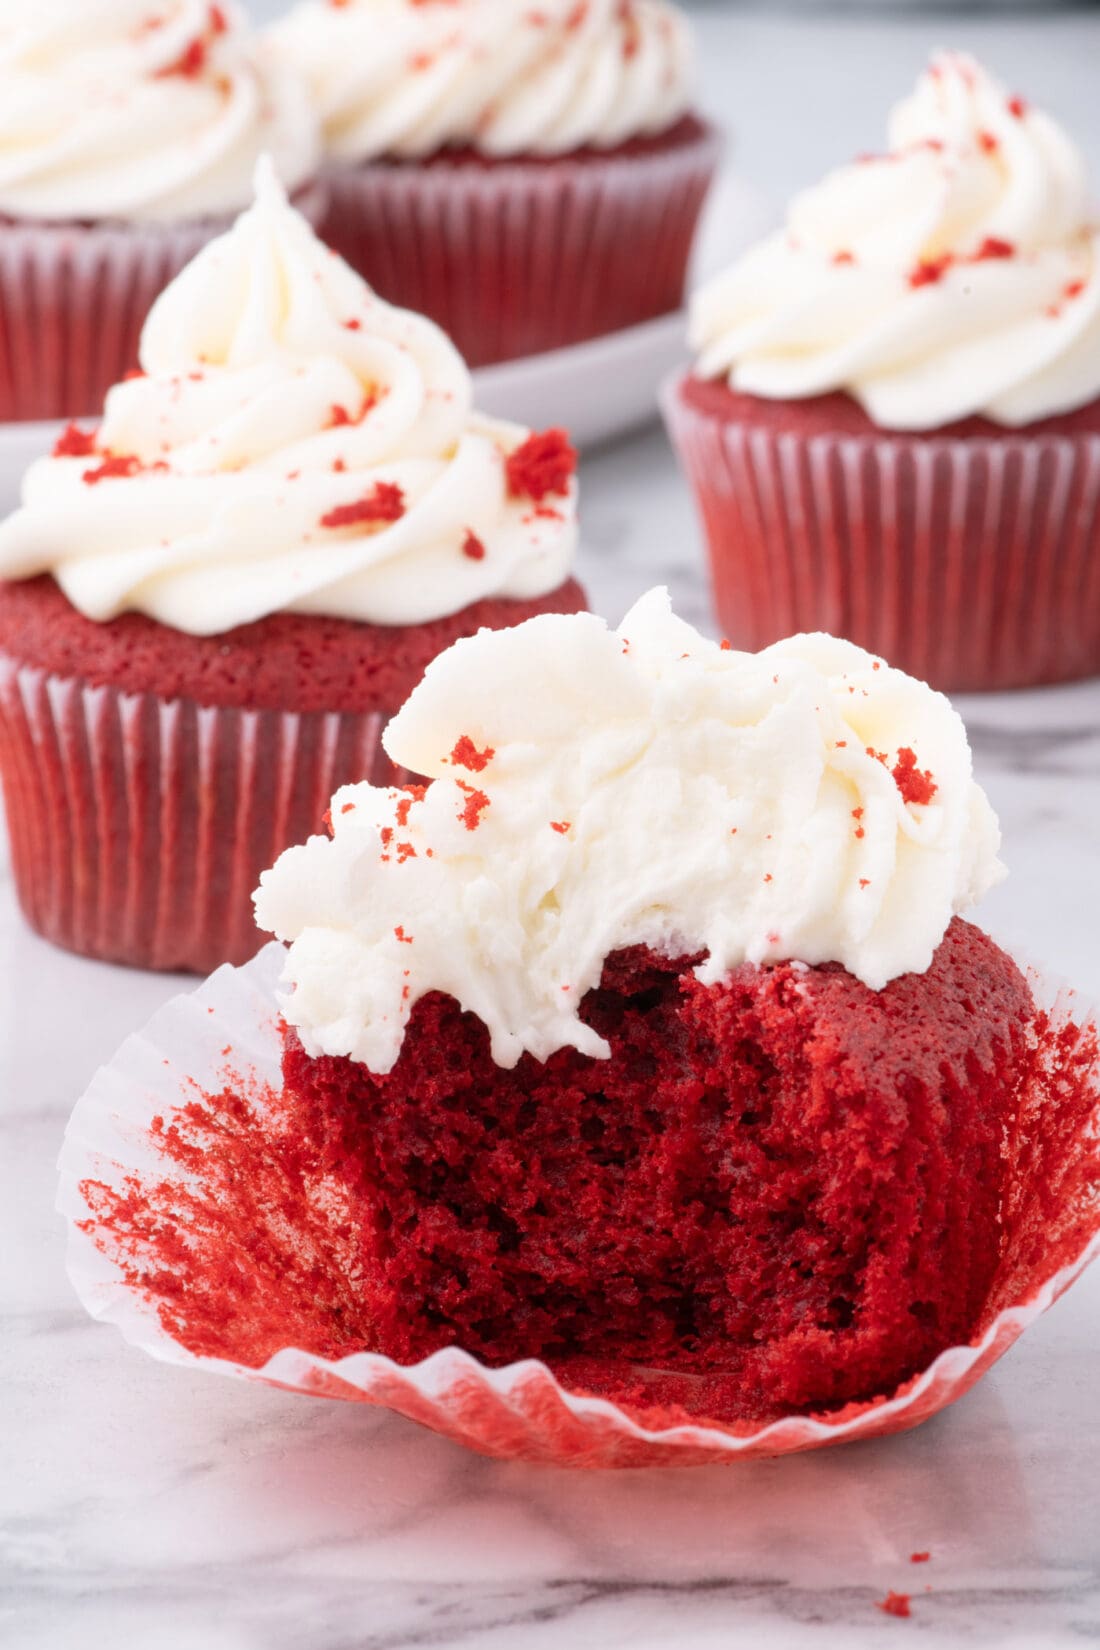 Red Velvet Cupcake with a bite taken out